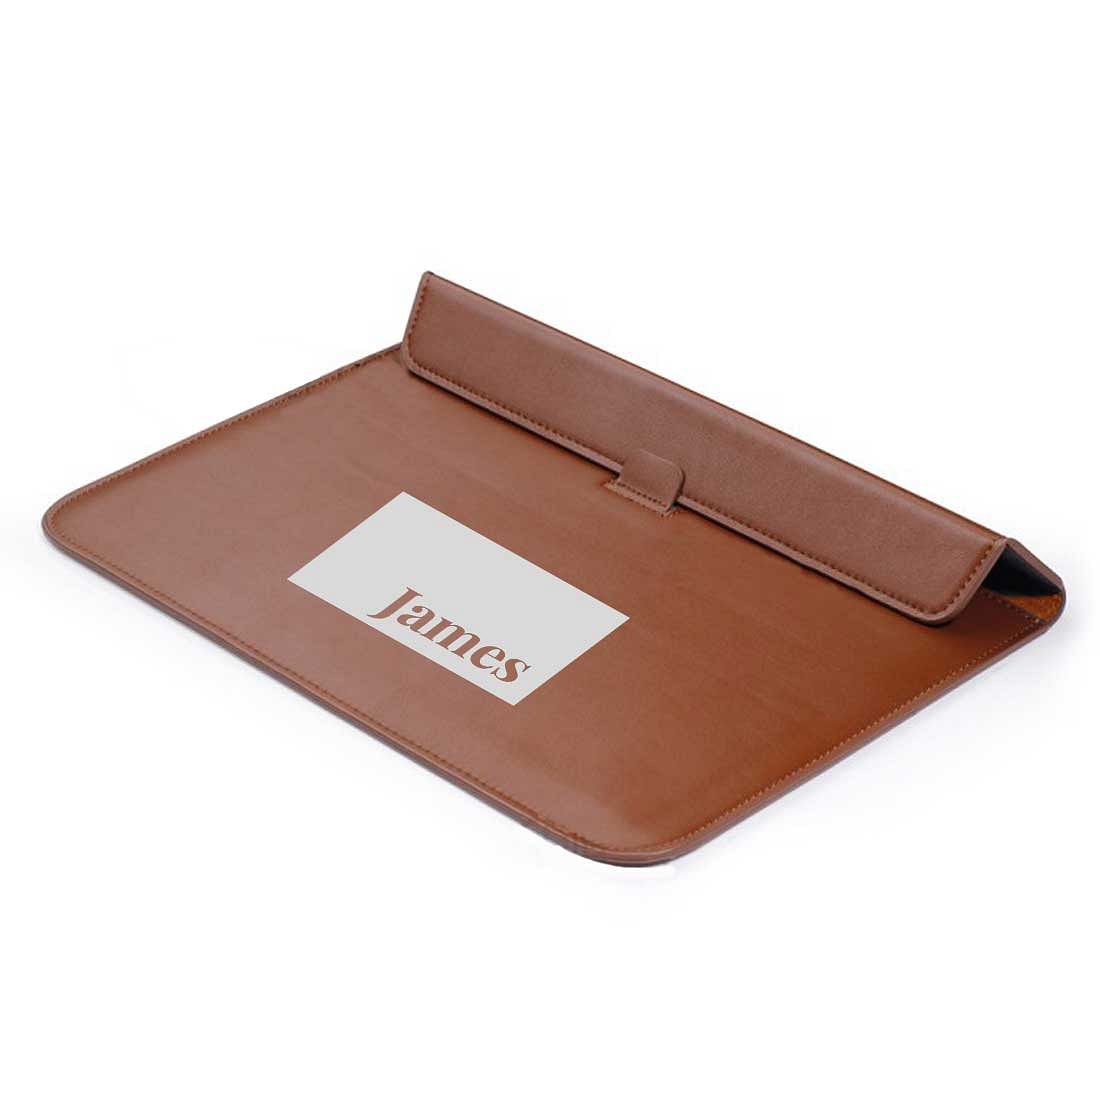 Personalized Laptop Cover For Men - Box Name Nutcase